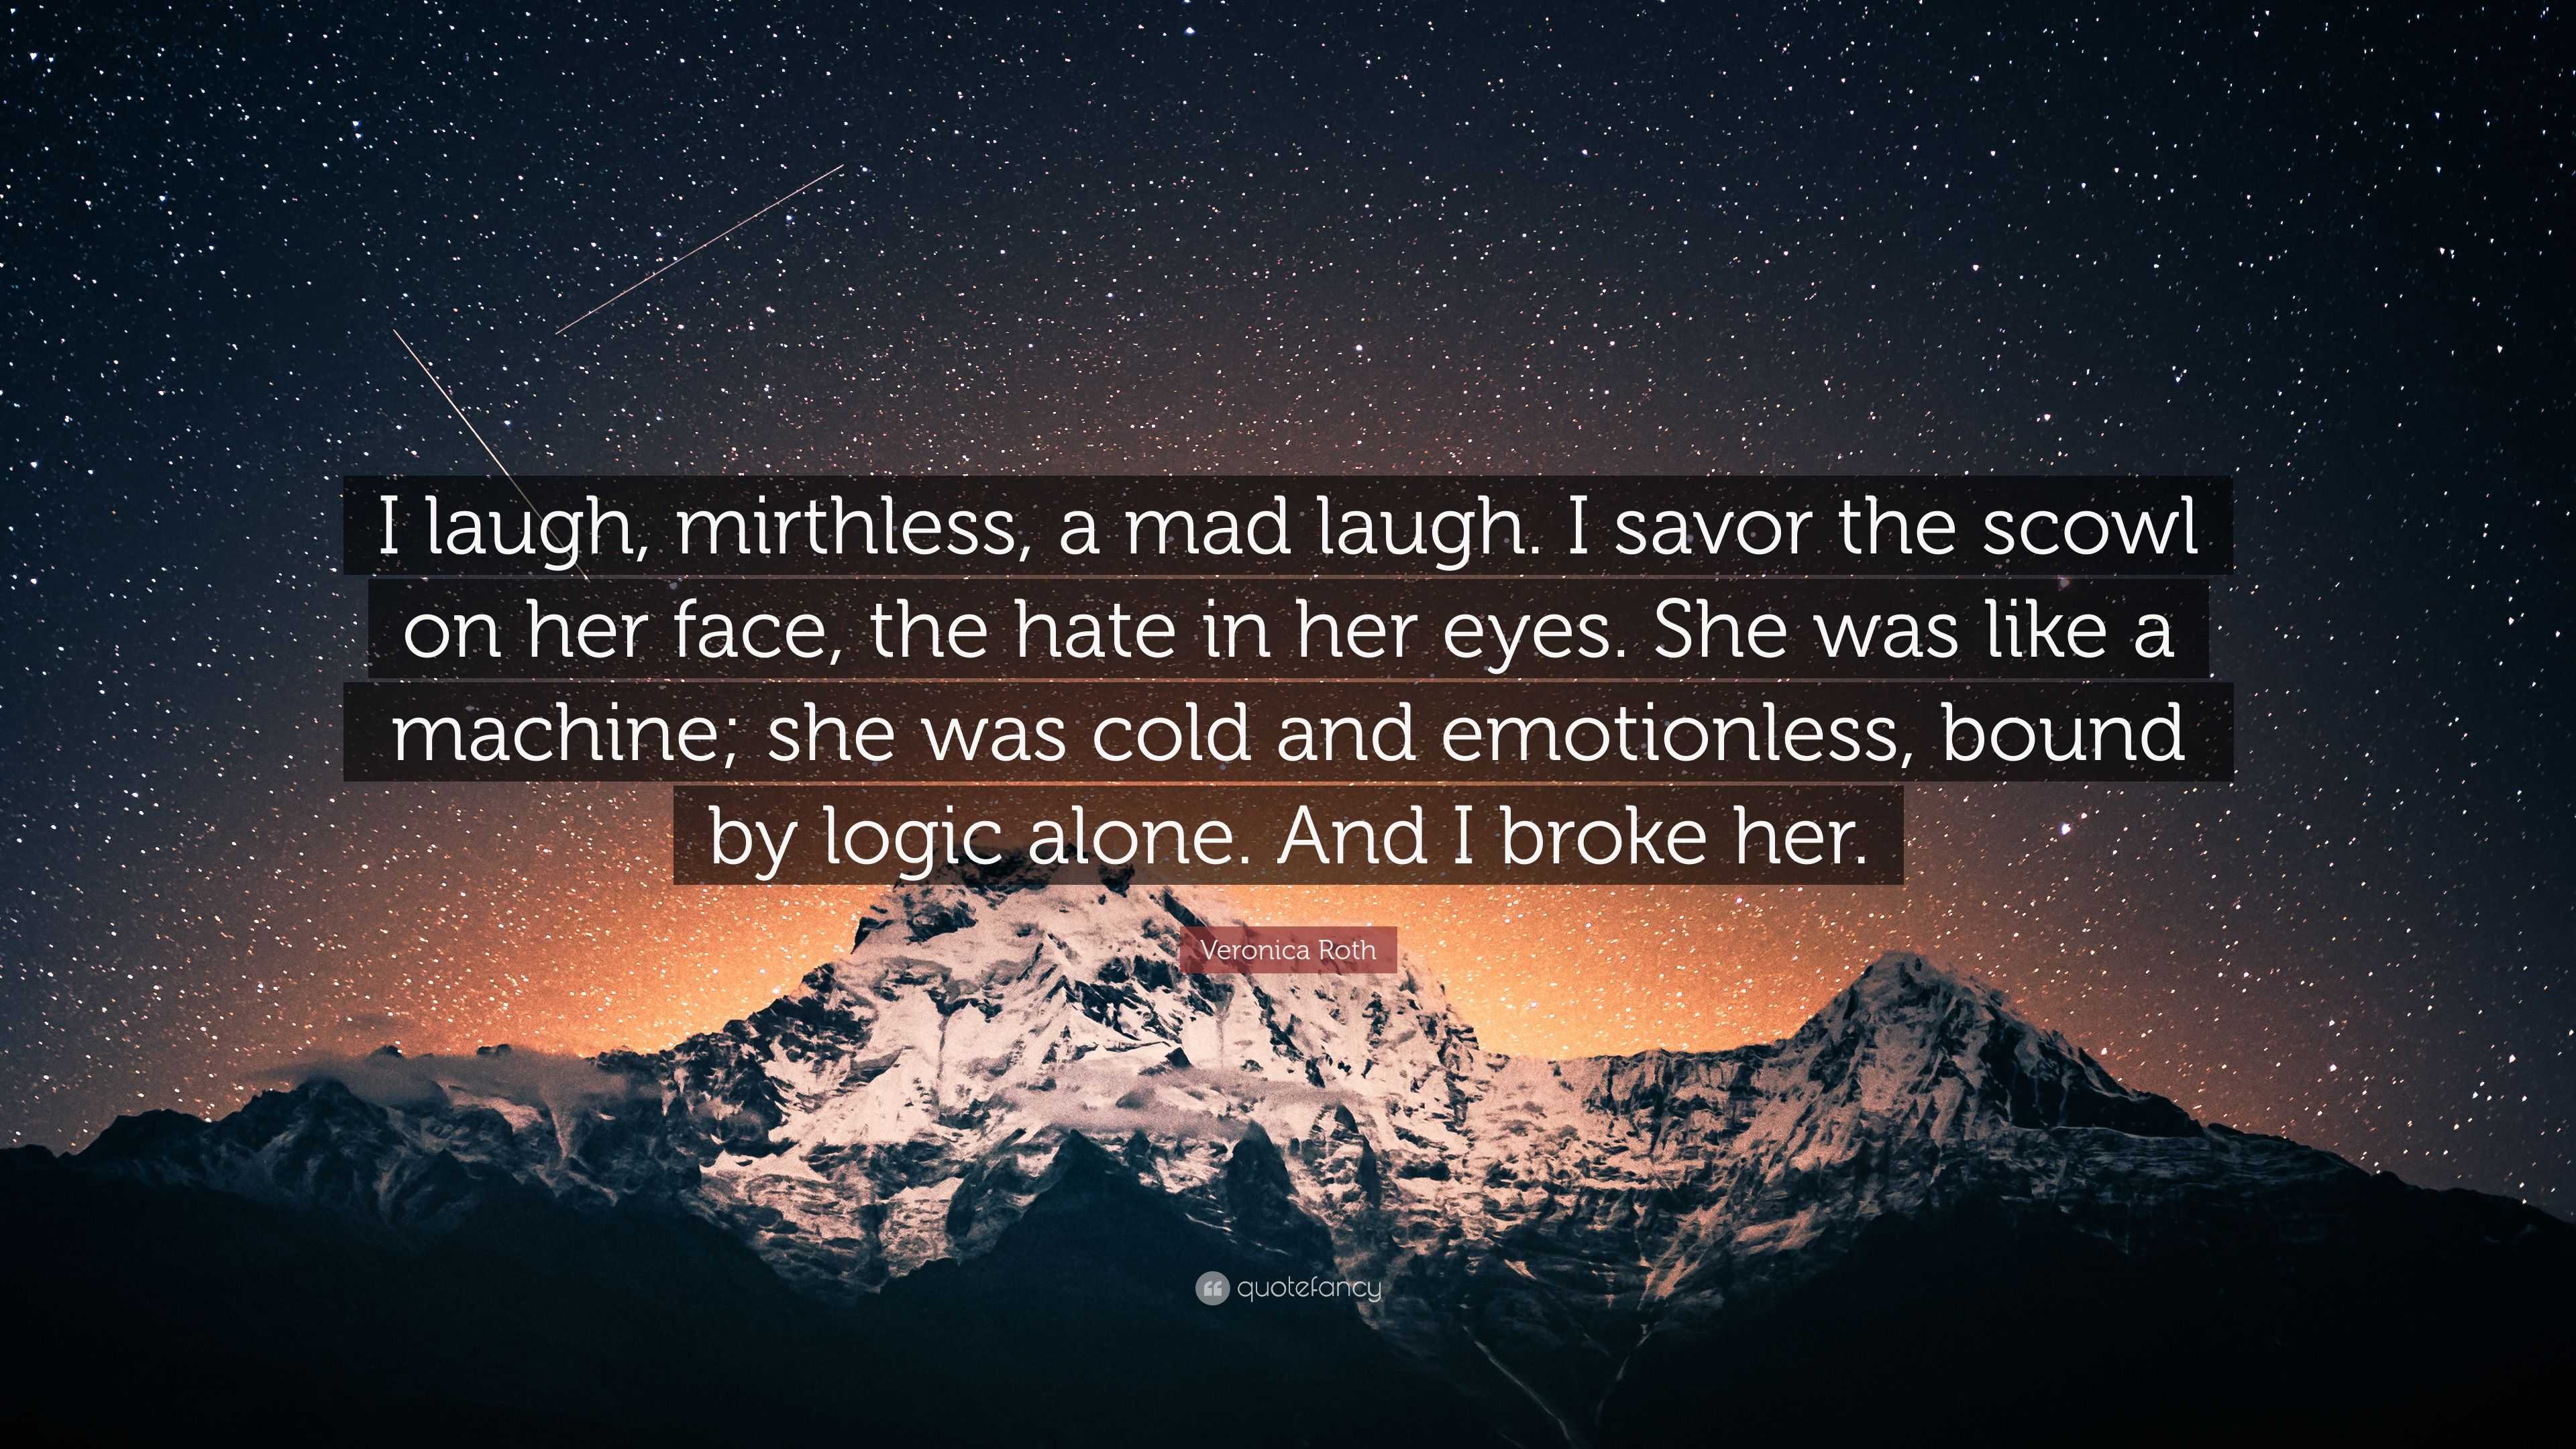 Veronica Roth Quote: “I laugh, mirthless, a mad laugh. I savor the ...